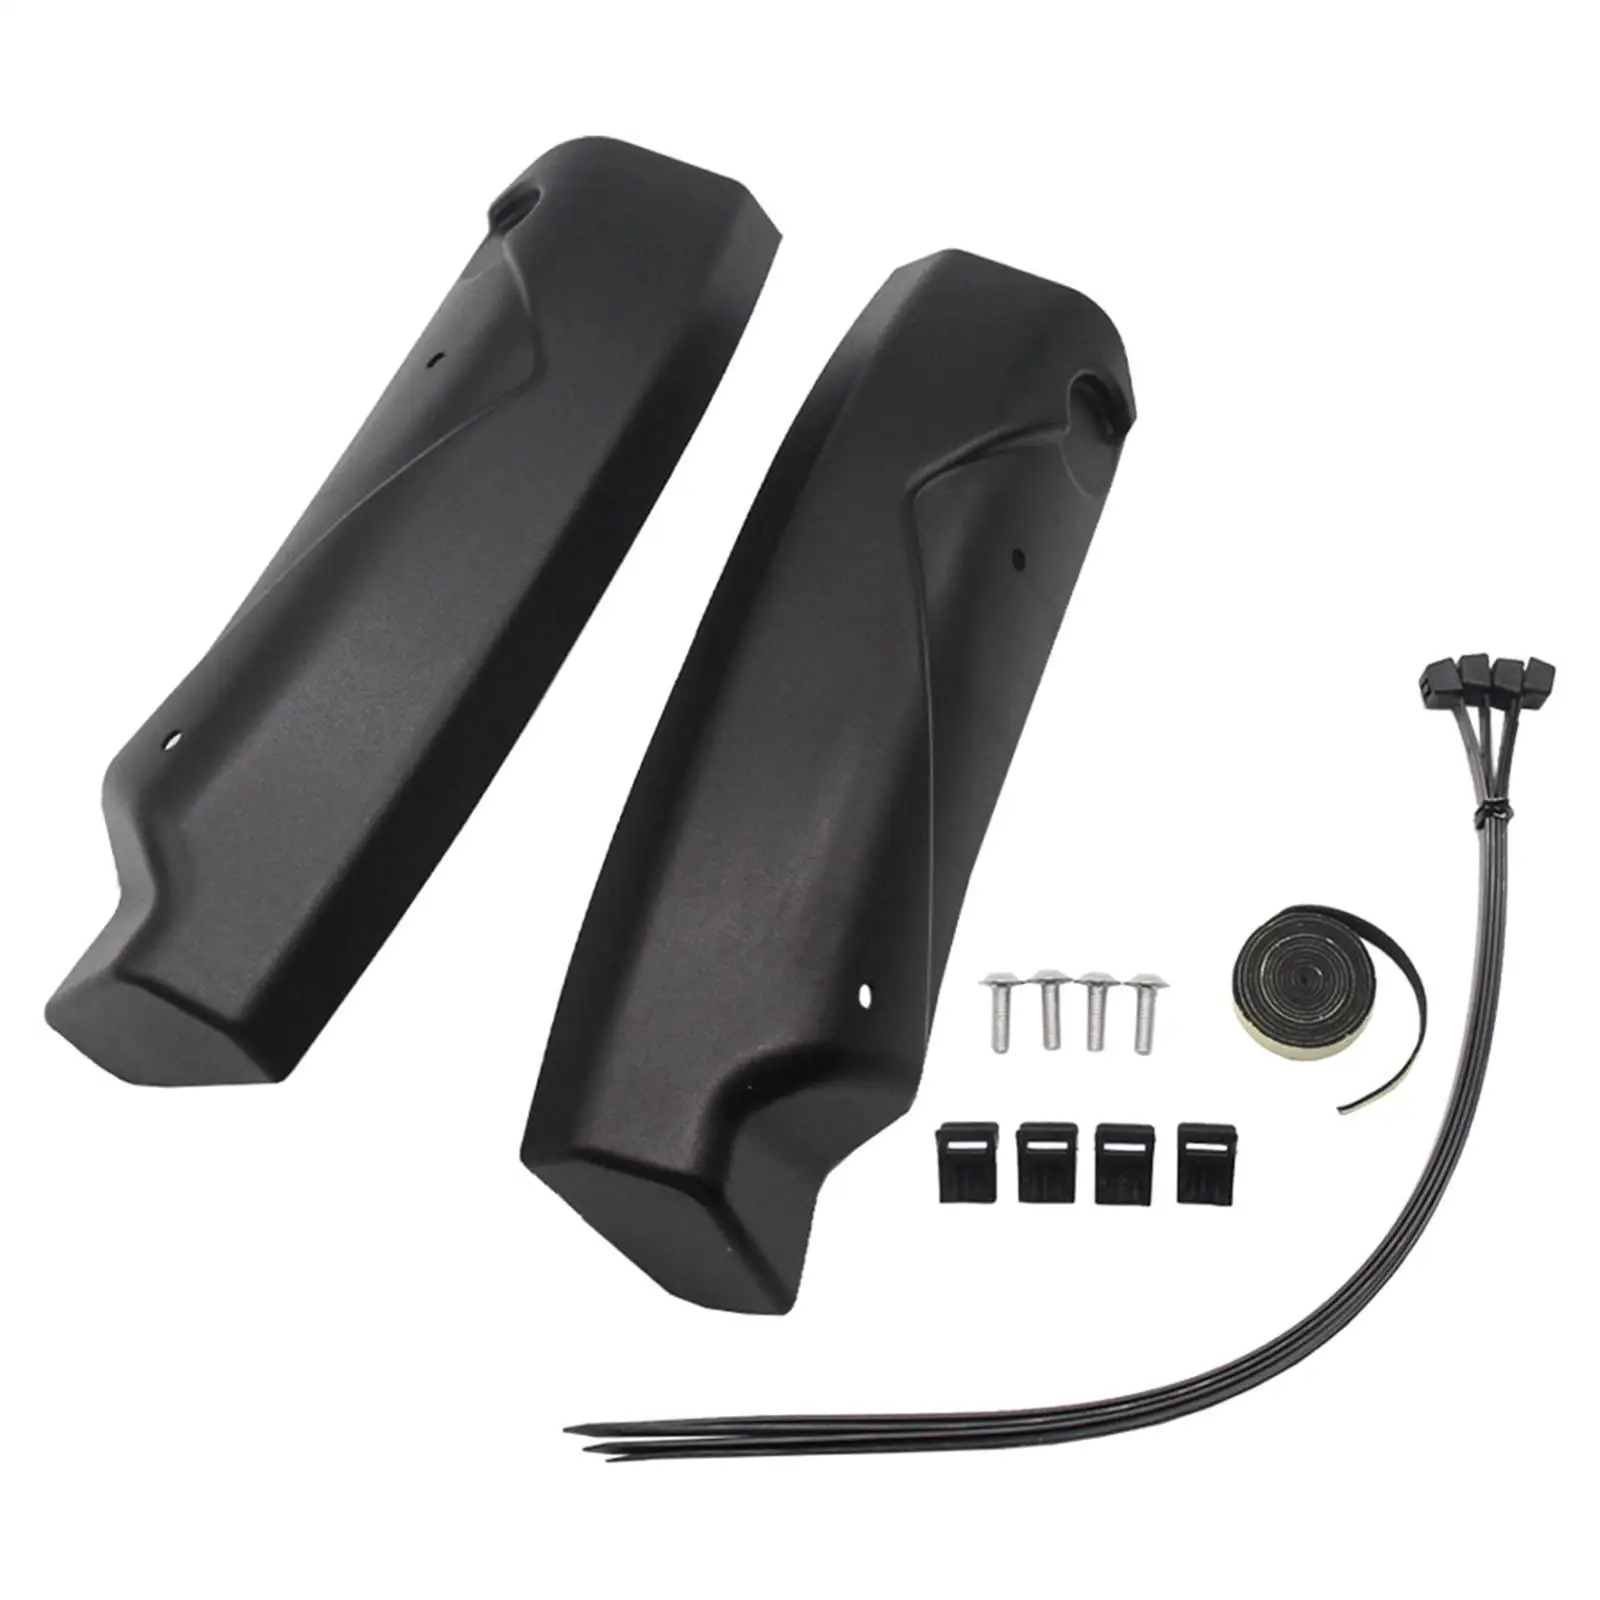 

Motocycle Fork Guard Protector for R1150GS R1150Gsa Replacement ,Black Simple Installation Protection